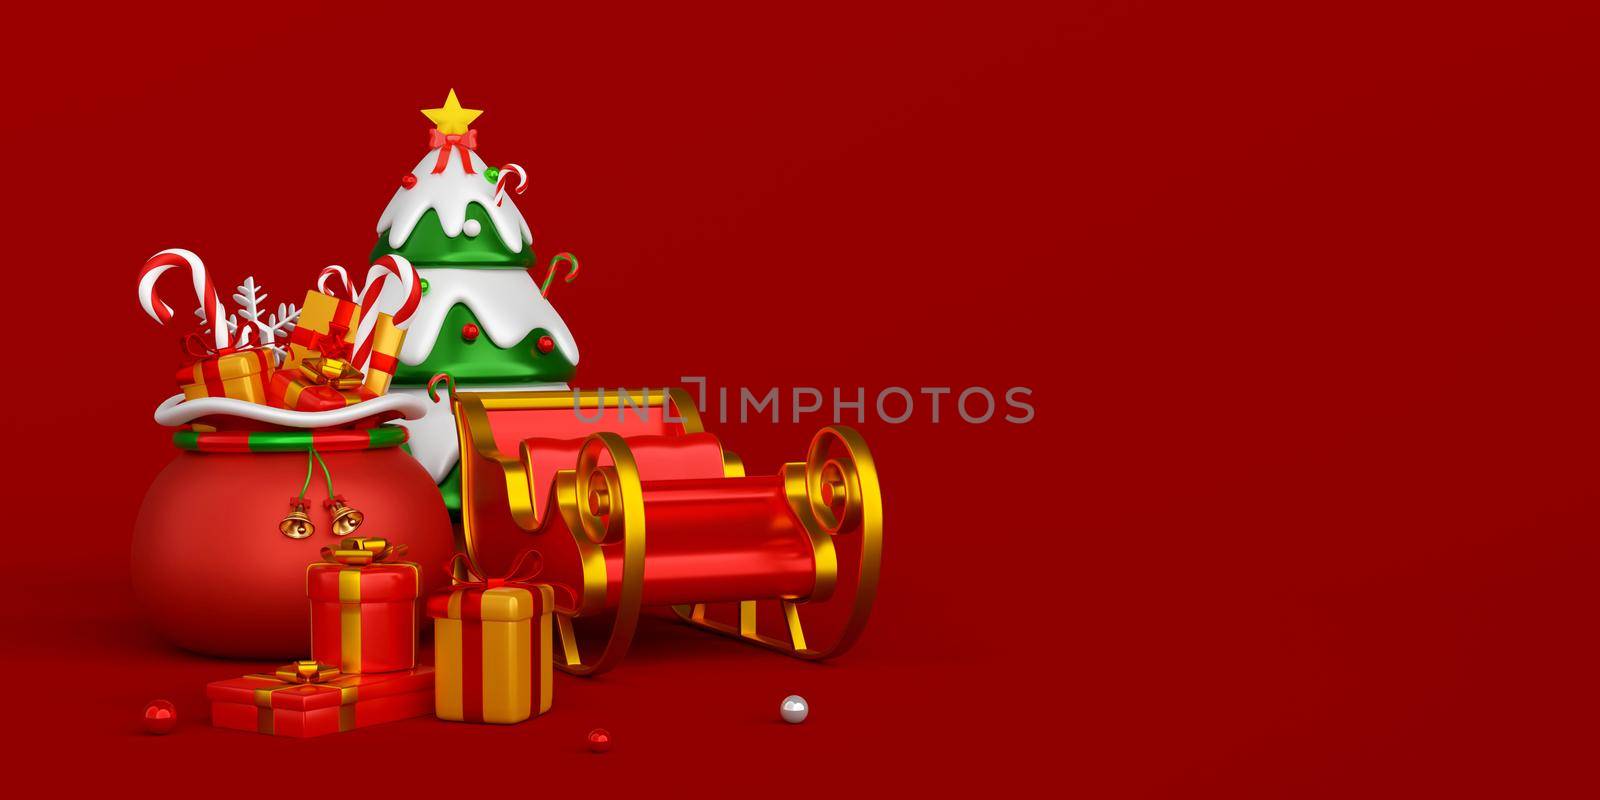 Christmas banner of Christmas bag and sleigh on red background, 3d illustration